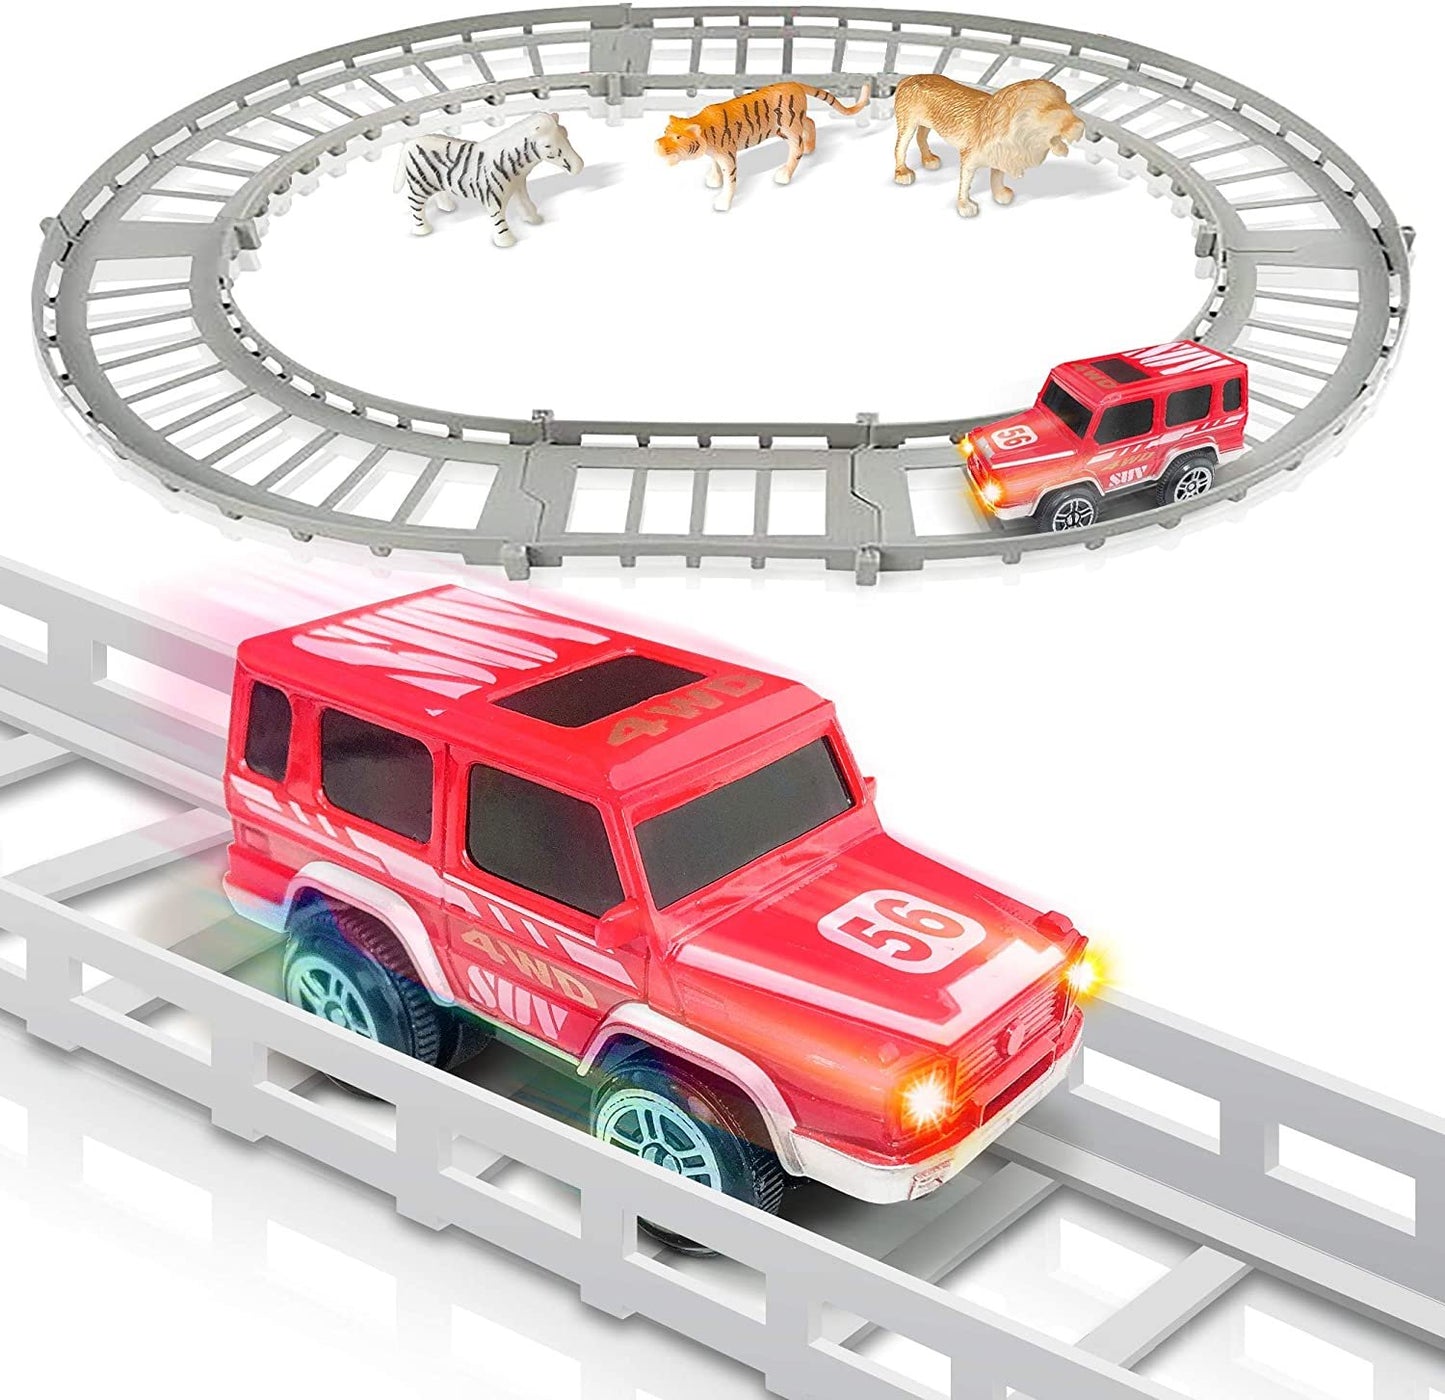 ArtCreativity Battery Operated SUV Playset for Kids, Adventure Play Set with 3 Animal Figurines, 10 Tracks, and SUV Safari Car with Lights and Sounds, Best Car Gifts for Boys and Girls